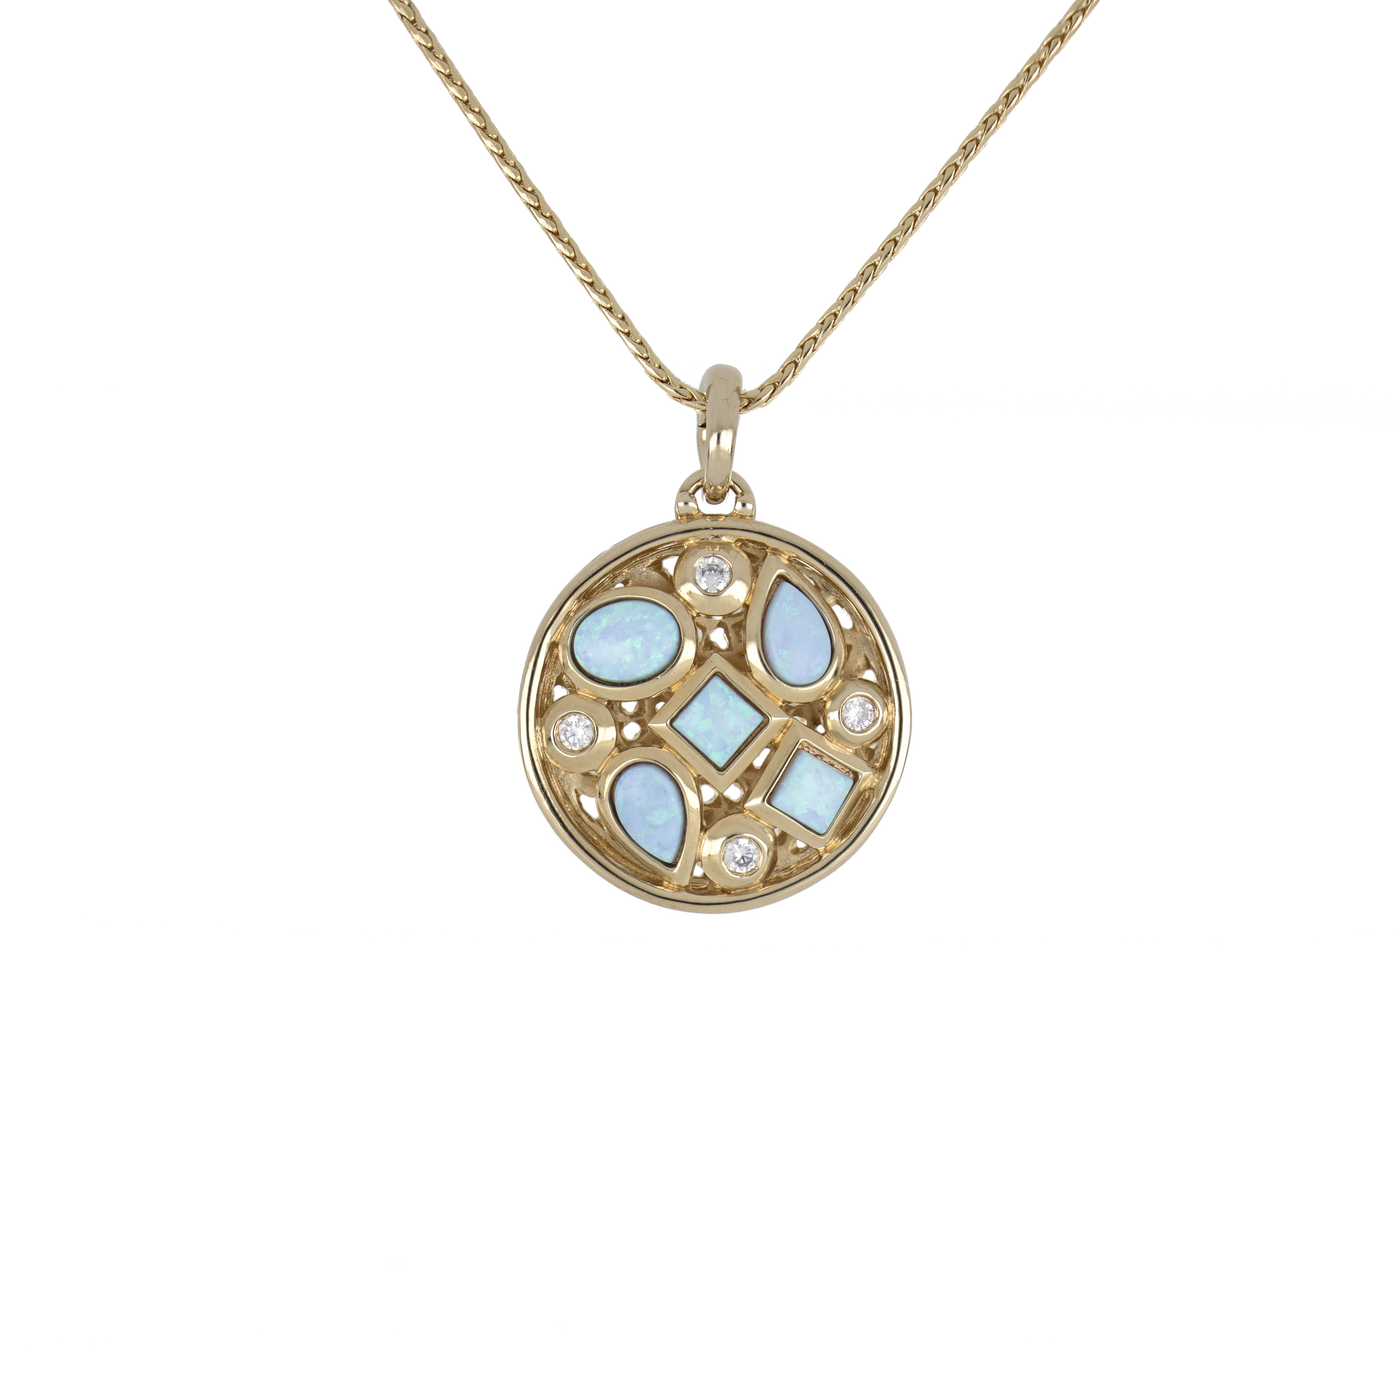 Opalas do Mar Collection - 5 Blue Opal Necklace with CZ